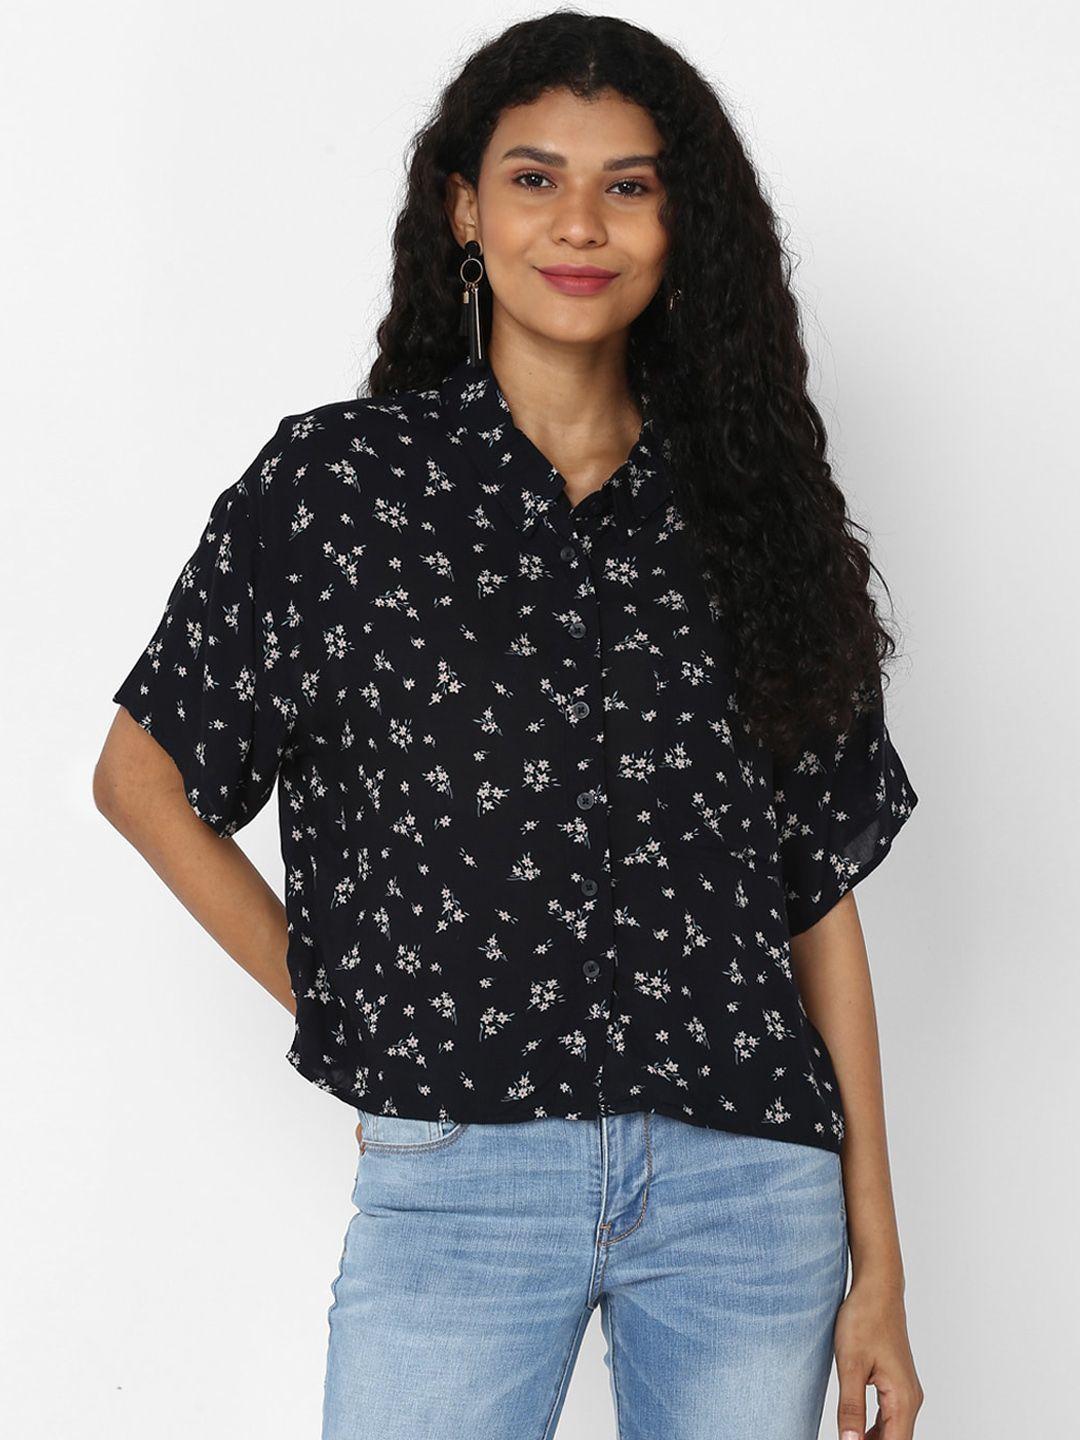 american-eagle-outfitters-women-black-&-off-white-floral-printed-casual-shirt